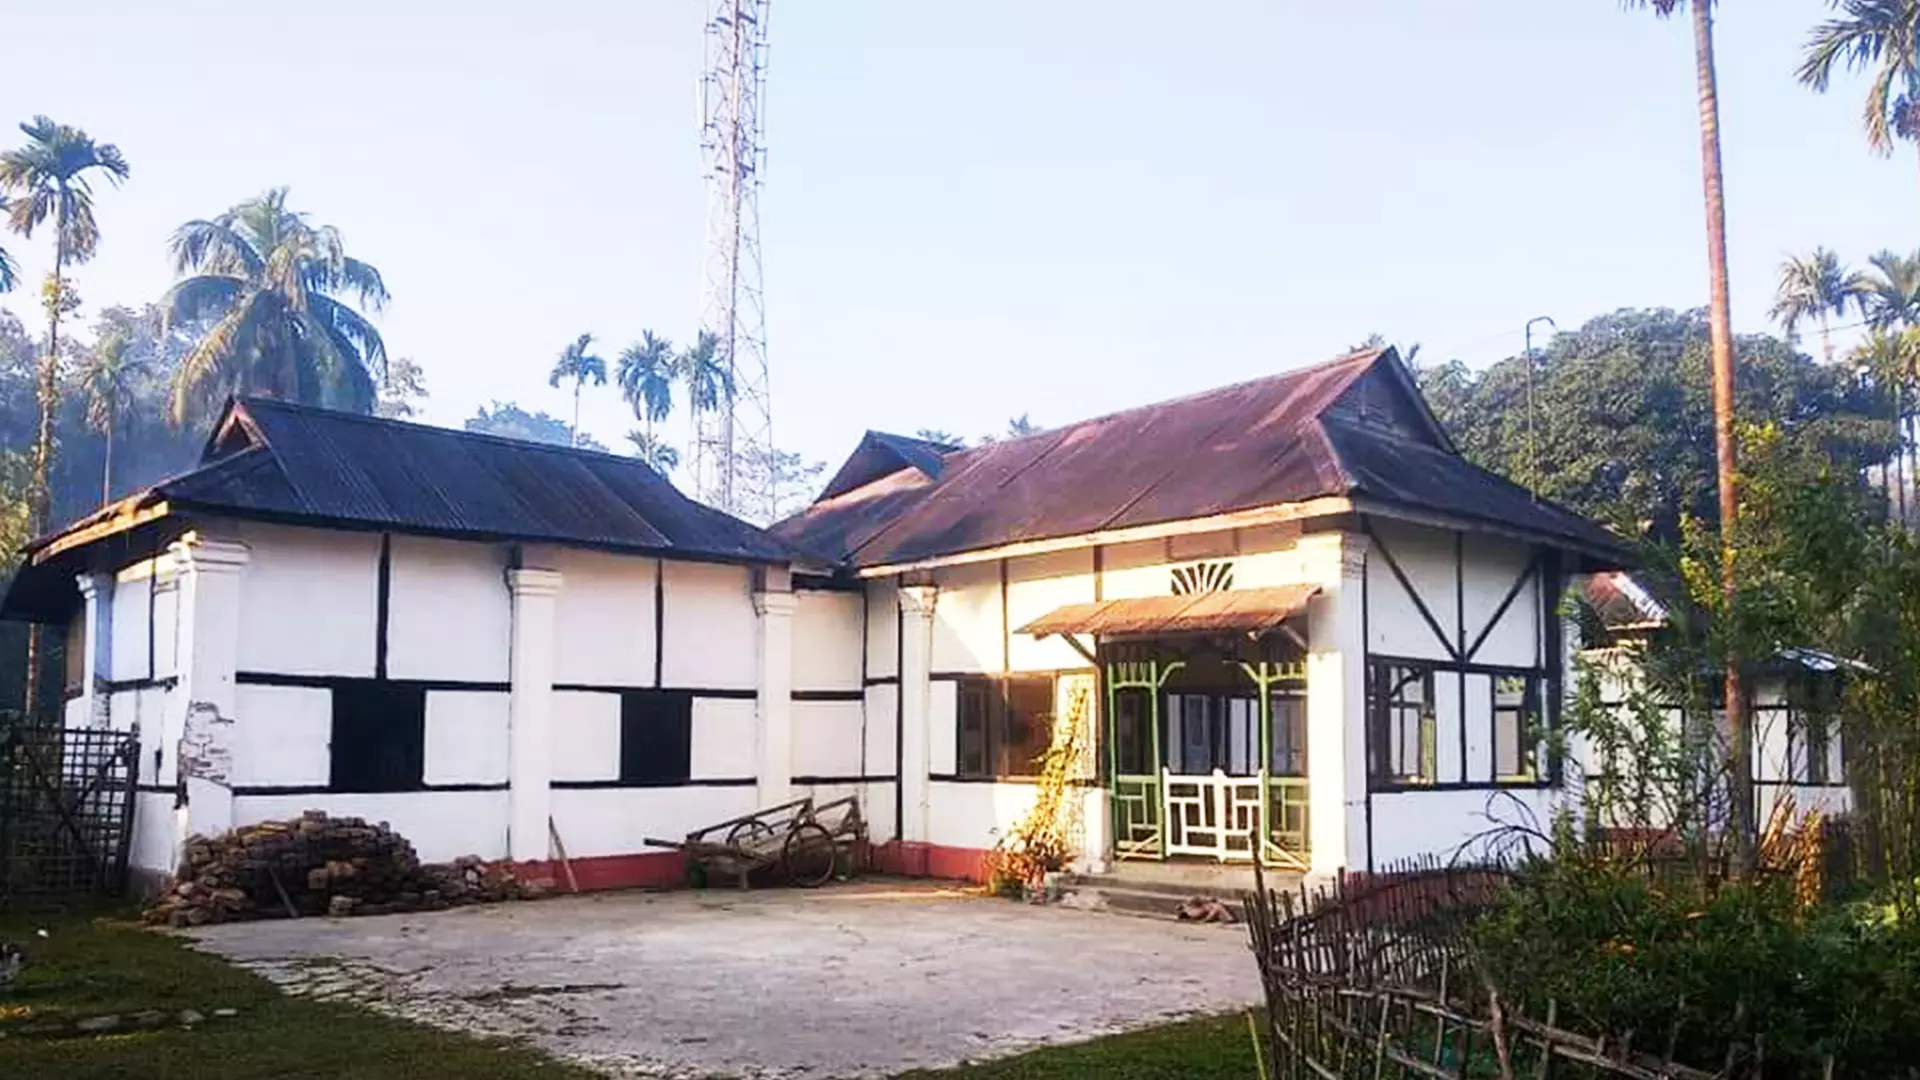 Since over five decades now, Assam-type houses have been gradually and surely giving way to RCC buildings. 